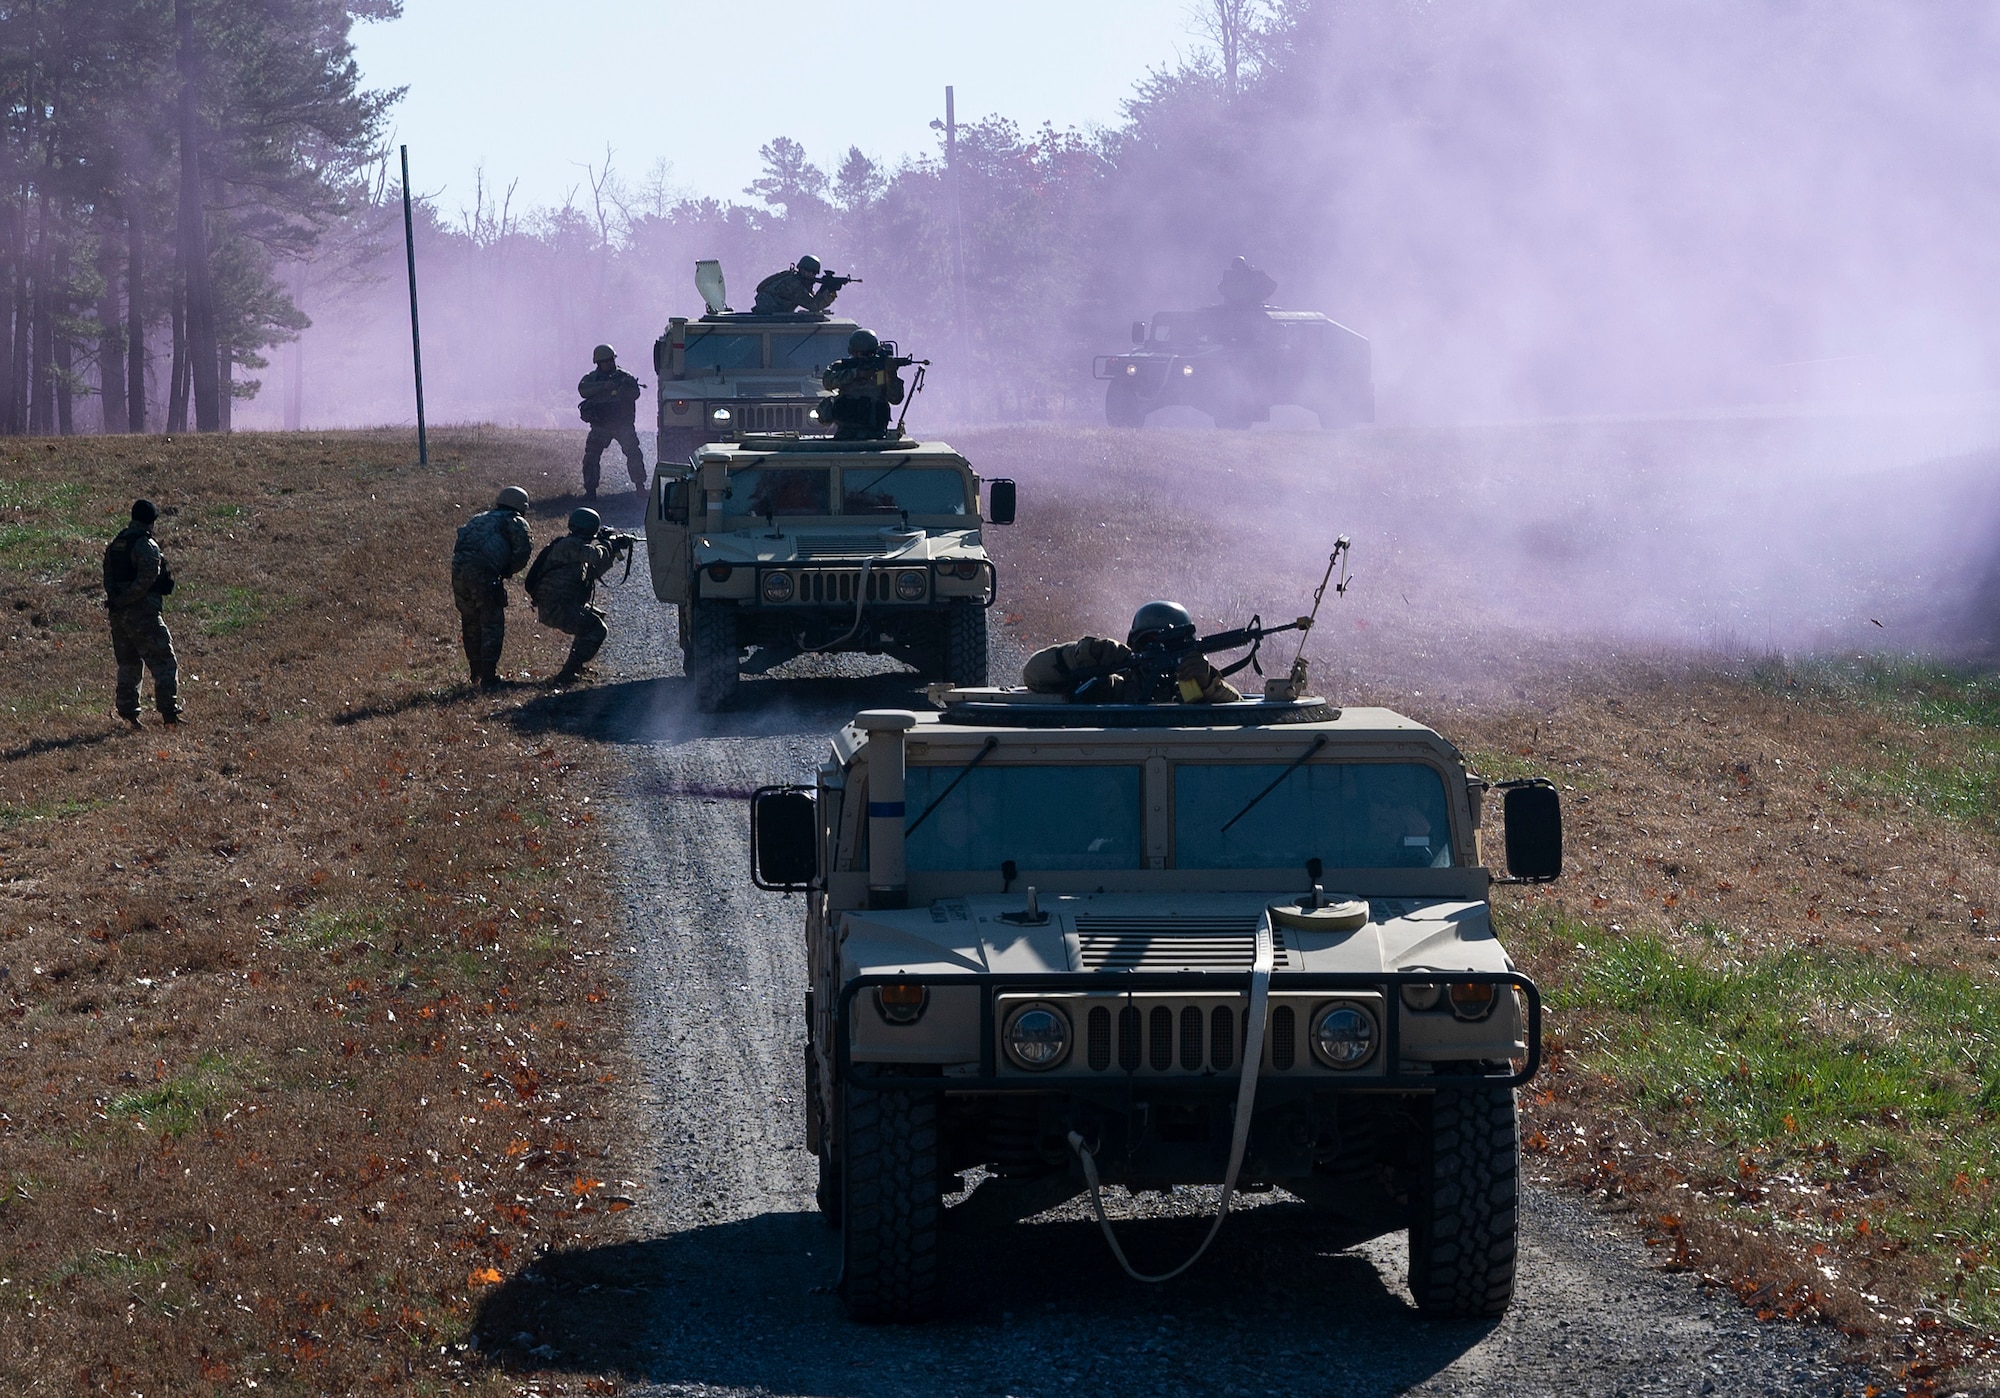 U.S. Air Force Field Craft Hostile students engage with hostile forces during a field training exercise at Joint Base McGuire-Dix-Lakehurst, New Jersey, Nov. 19, 2021. FCH is a pre-deployment course directed by the 421st Combat Training Squadron, that teaches basic combat skills to over 5,000 U.S. Air Force, Joint and NATO personnel annually. (U.S. Air Force photo by Senior Airman Bryan Guthrie)